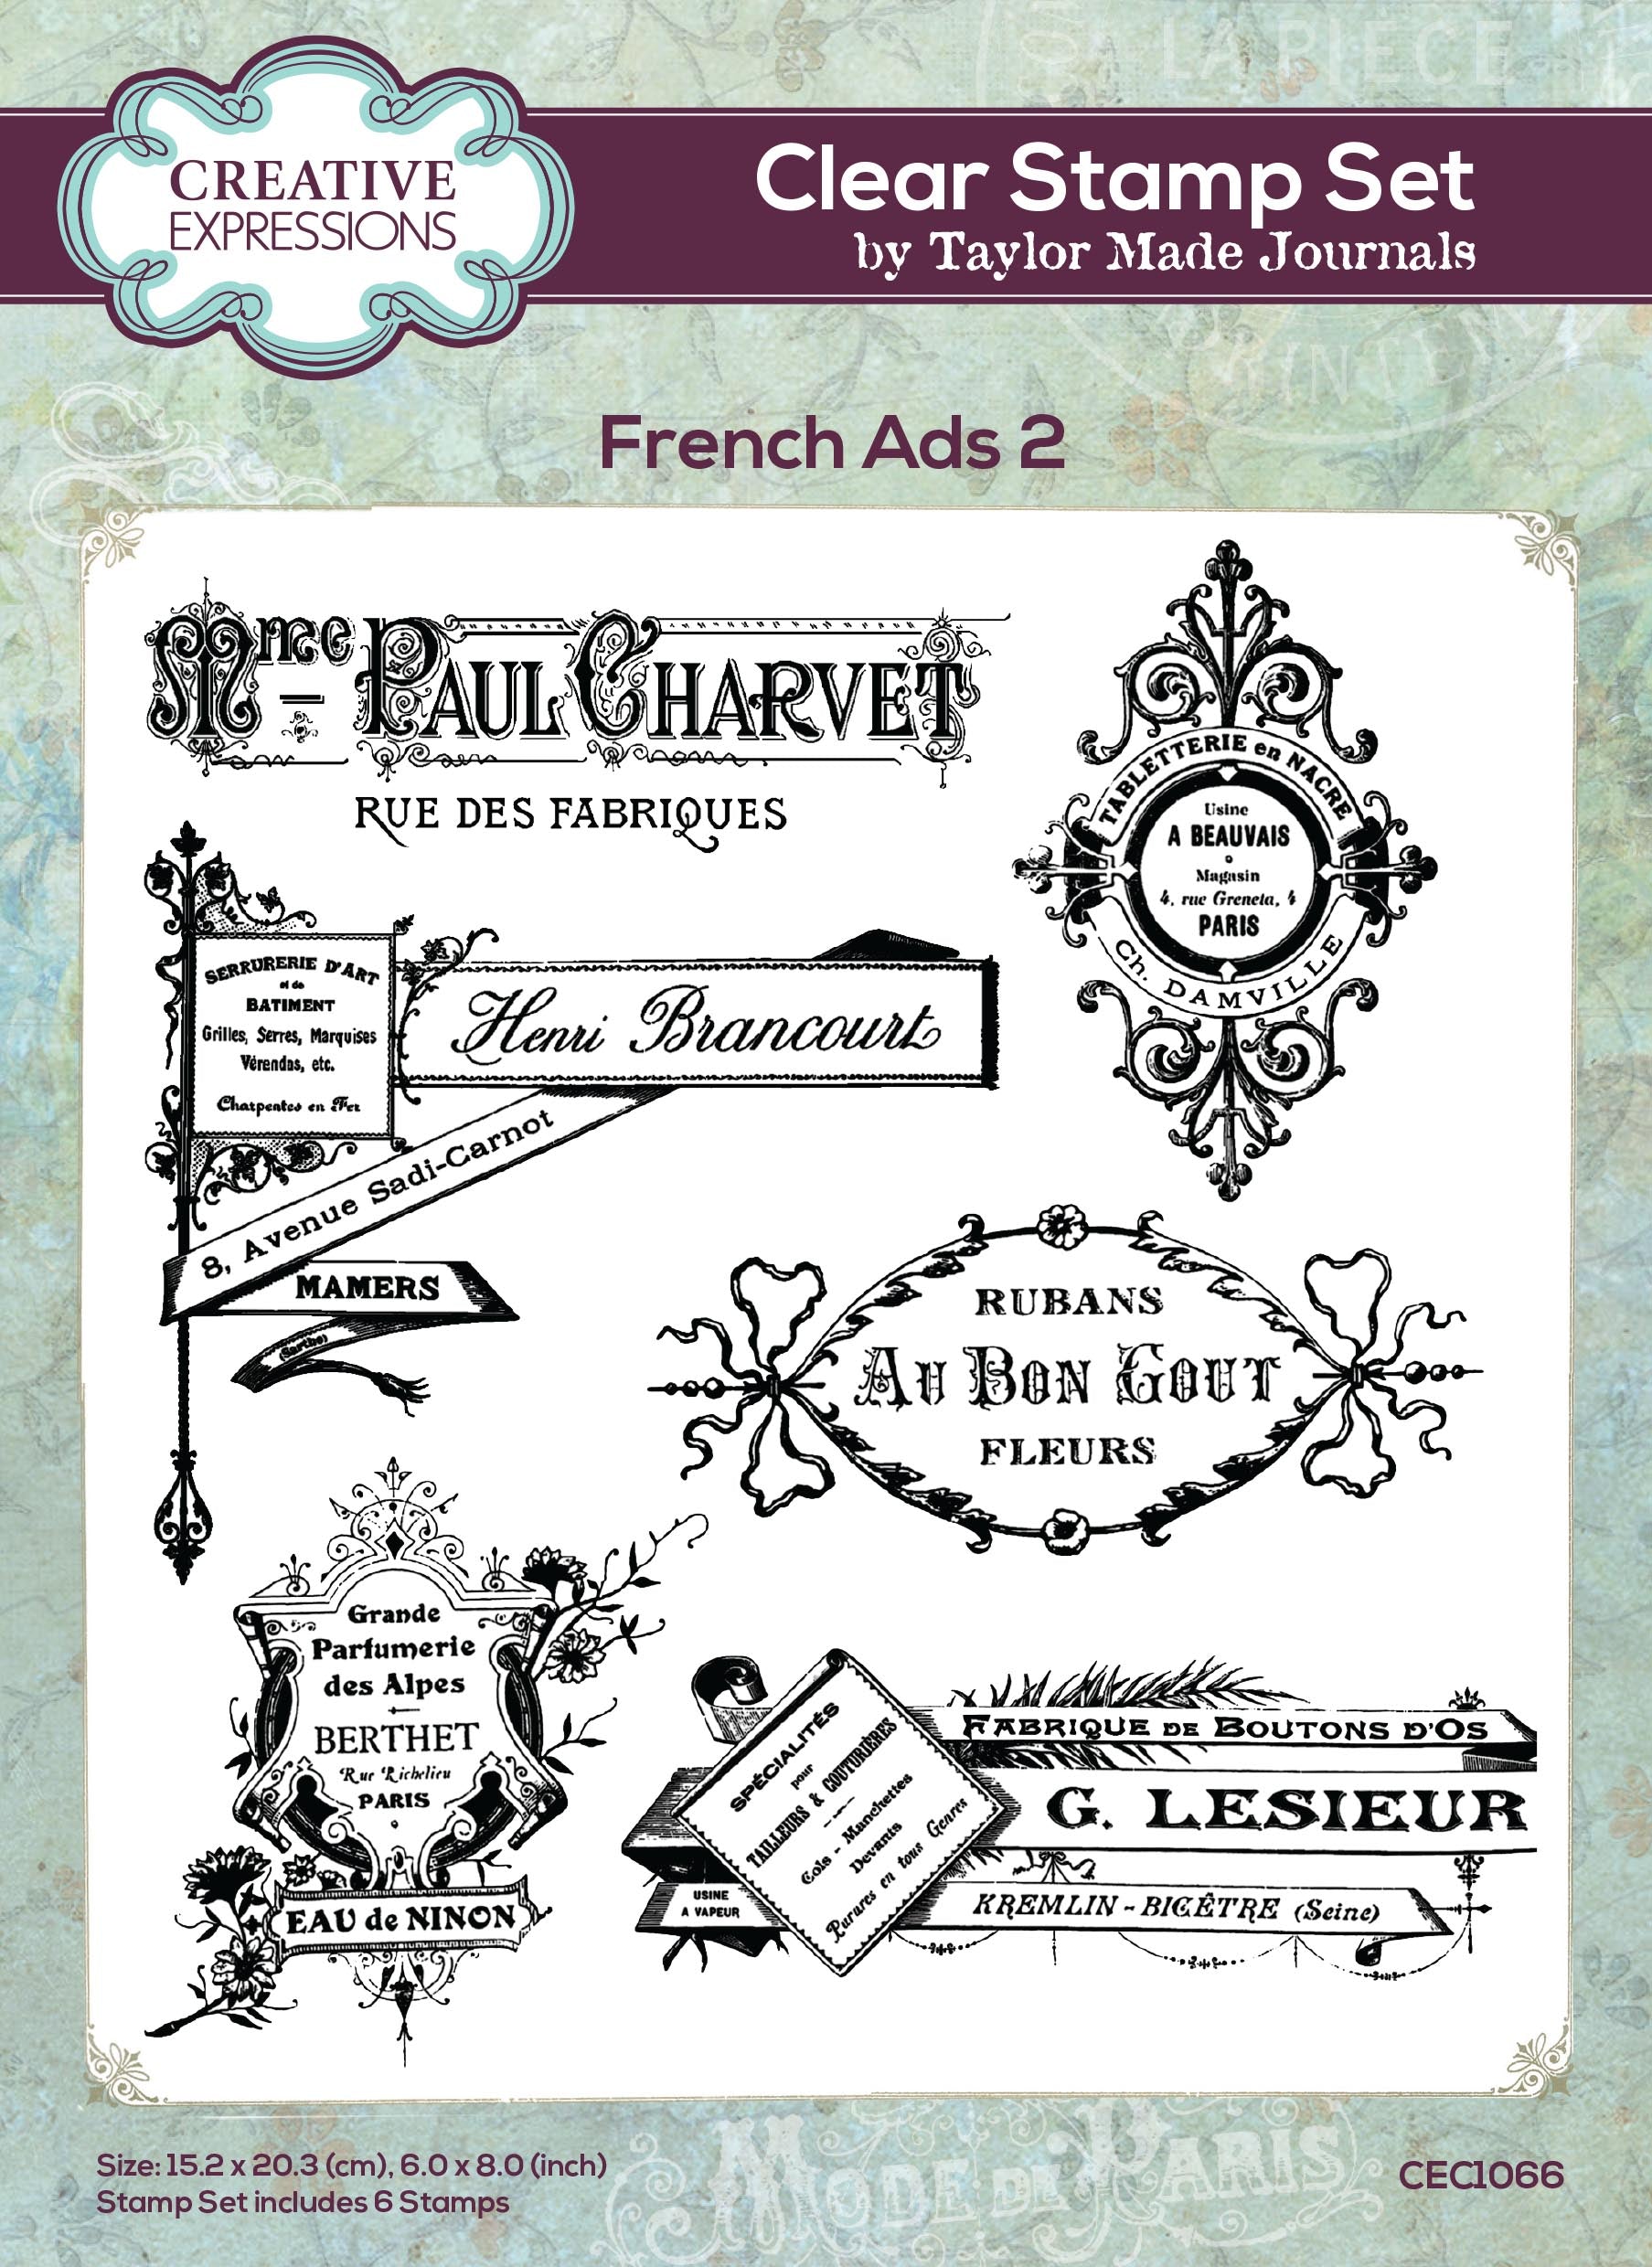 Creative Expressions Taylor Made Journals French Ads 2 6 in x 8 in Clear Stamp Set